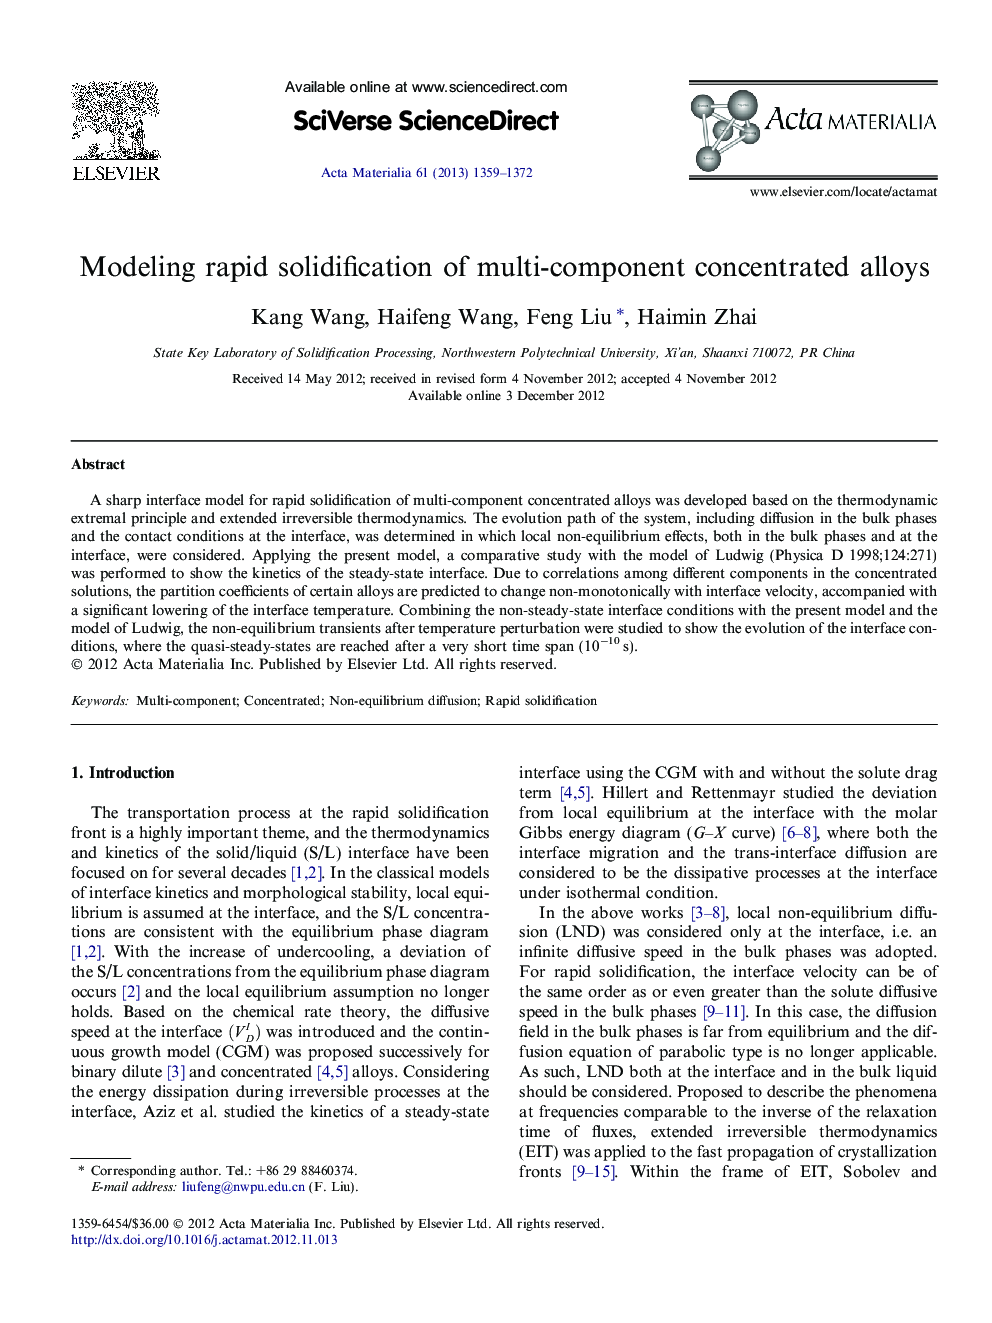 Modeling rapid solidification of multi-component concentrated alloys